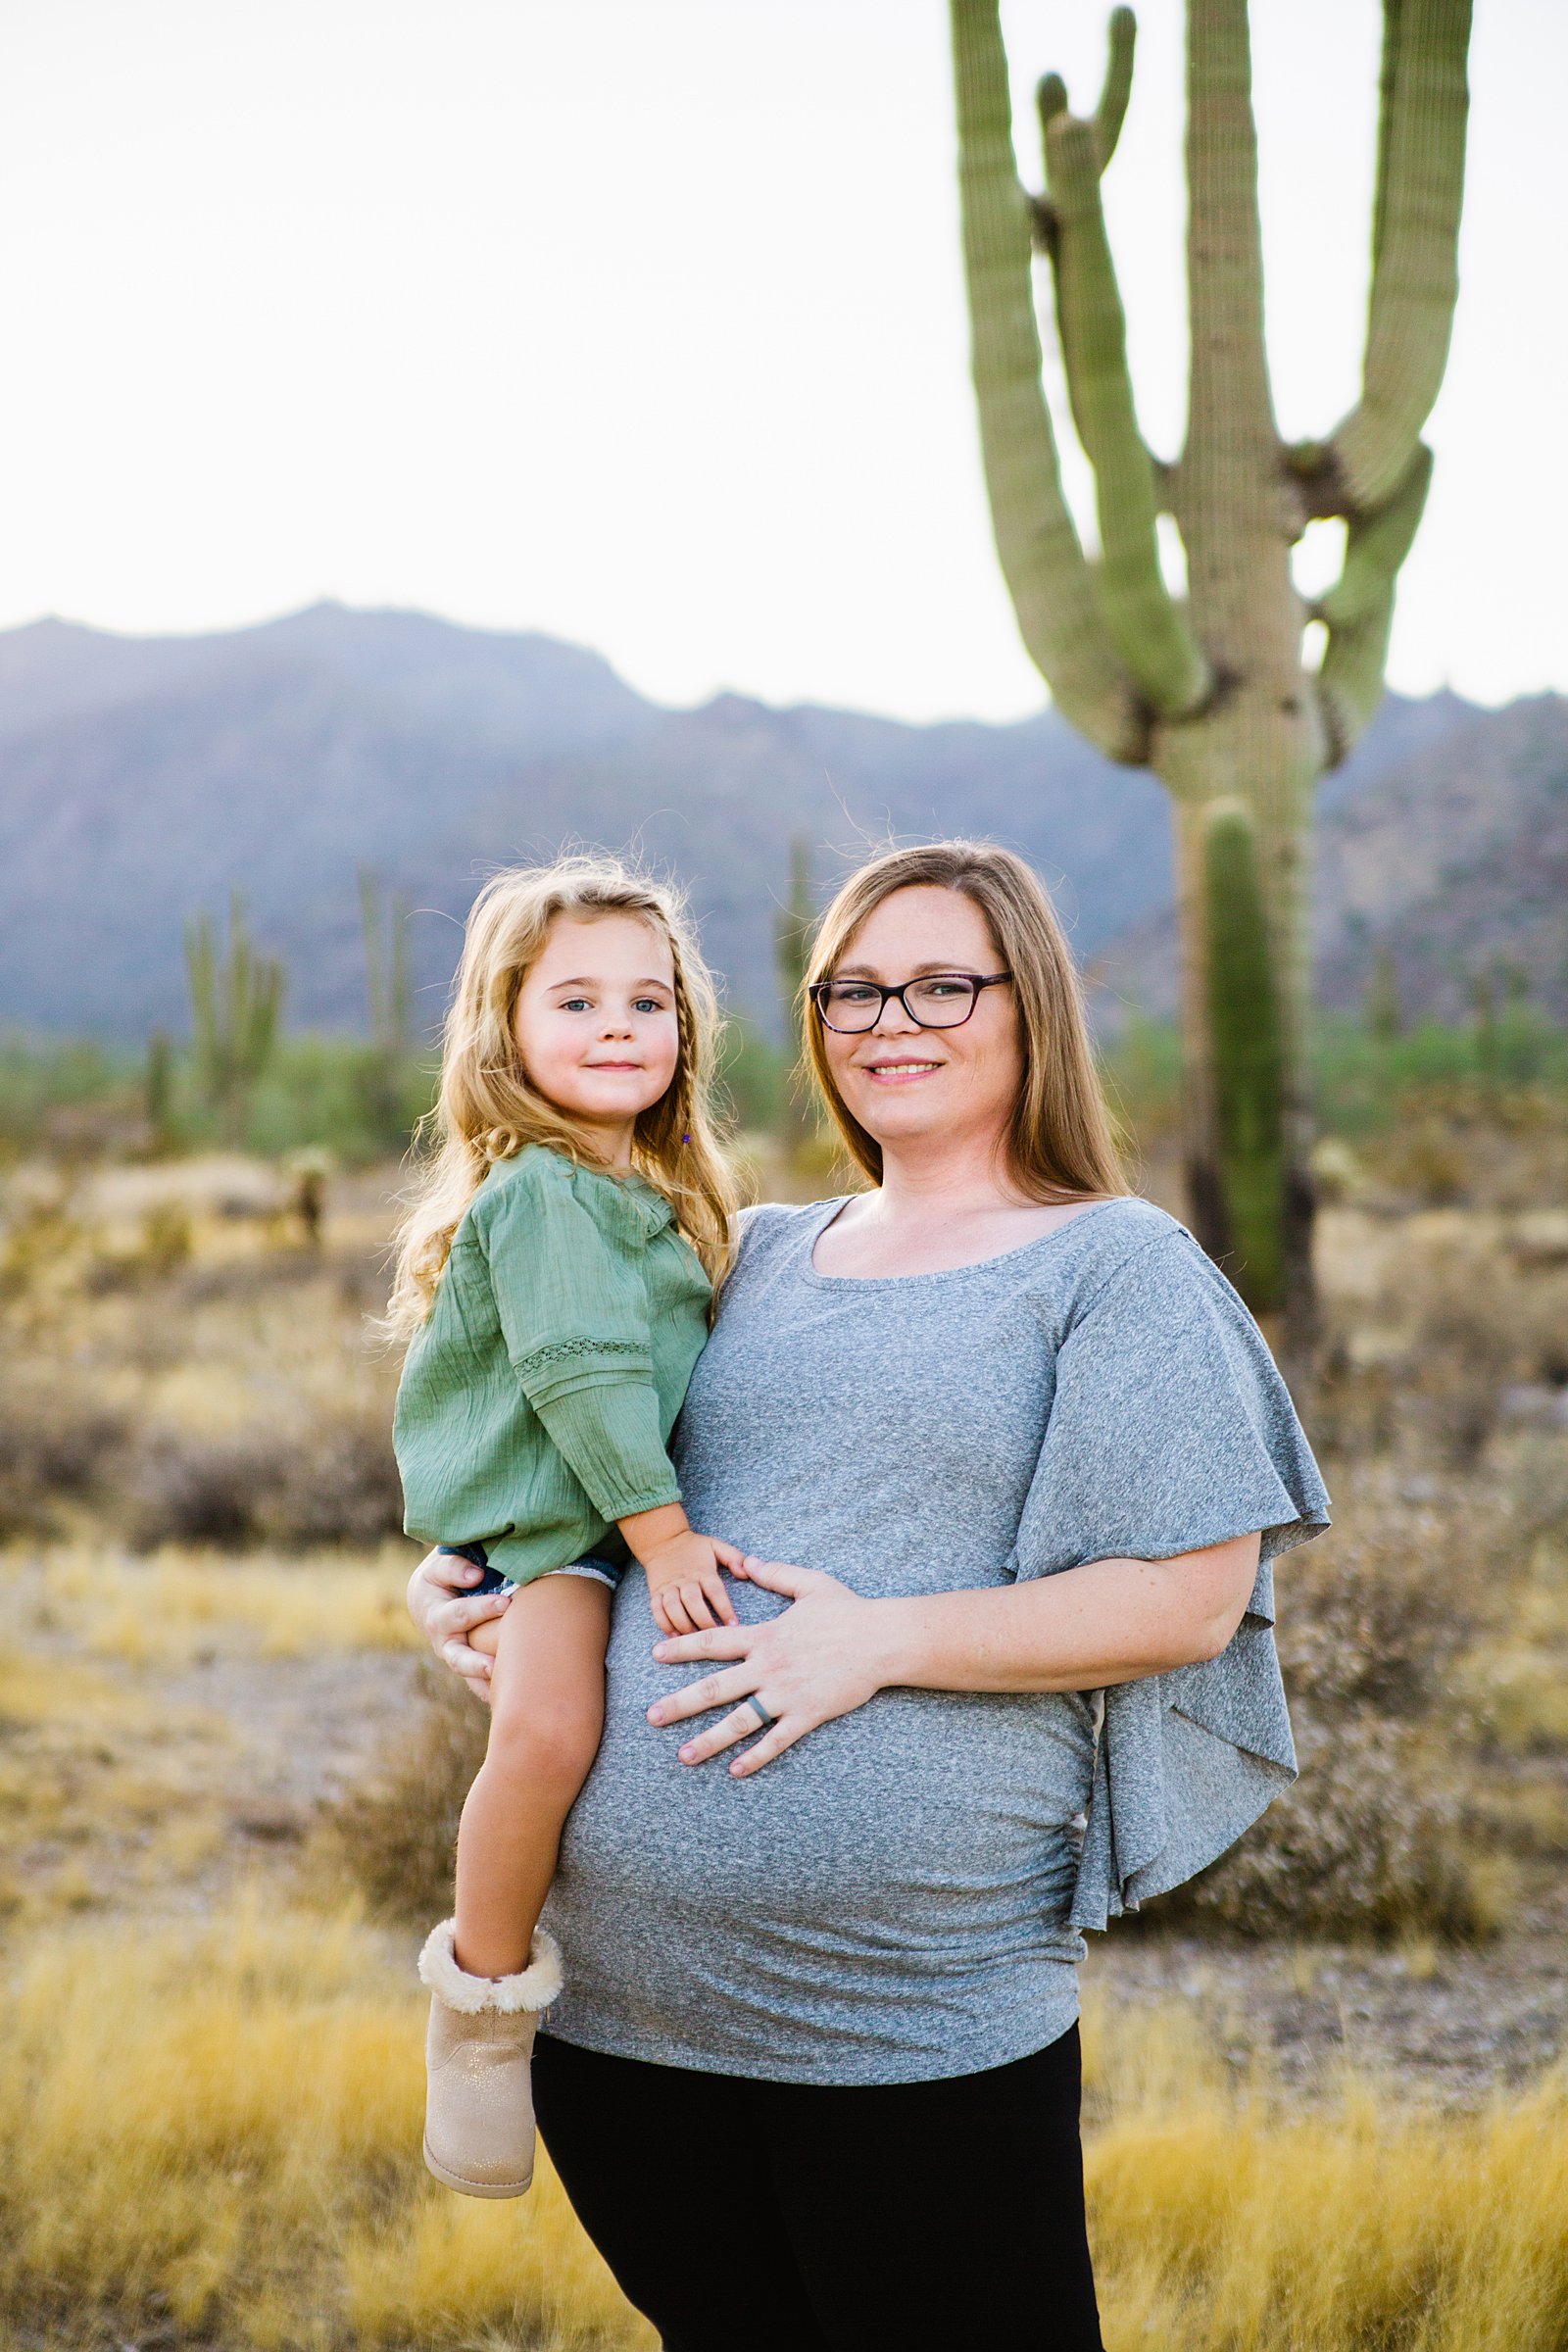 Family maternity session at the White Tanks by Phoenix maternity photographer PMA Photography.